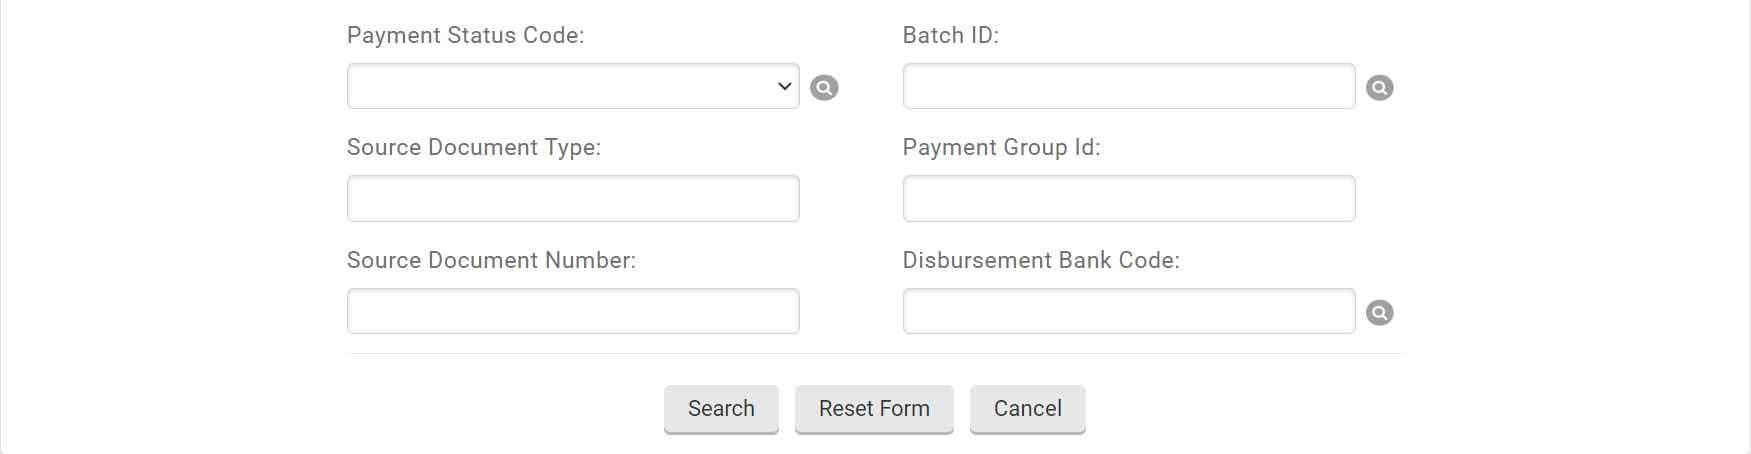 SearchforPayment3.png